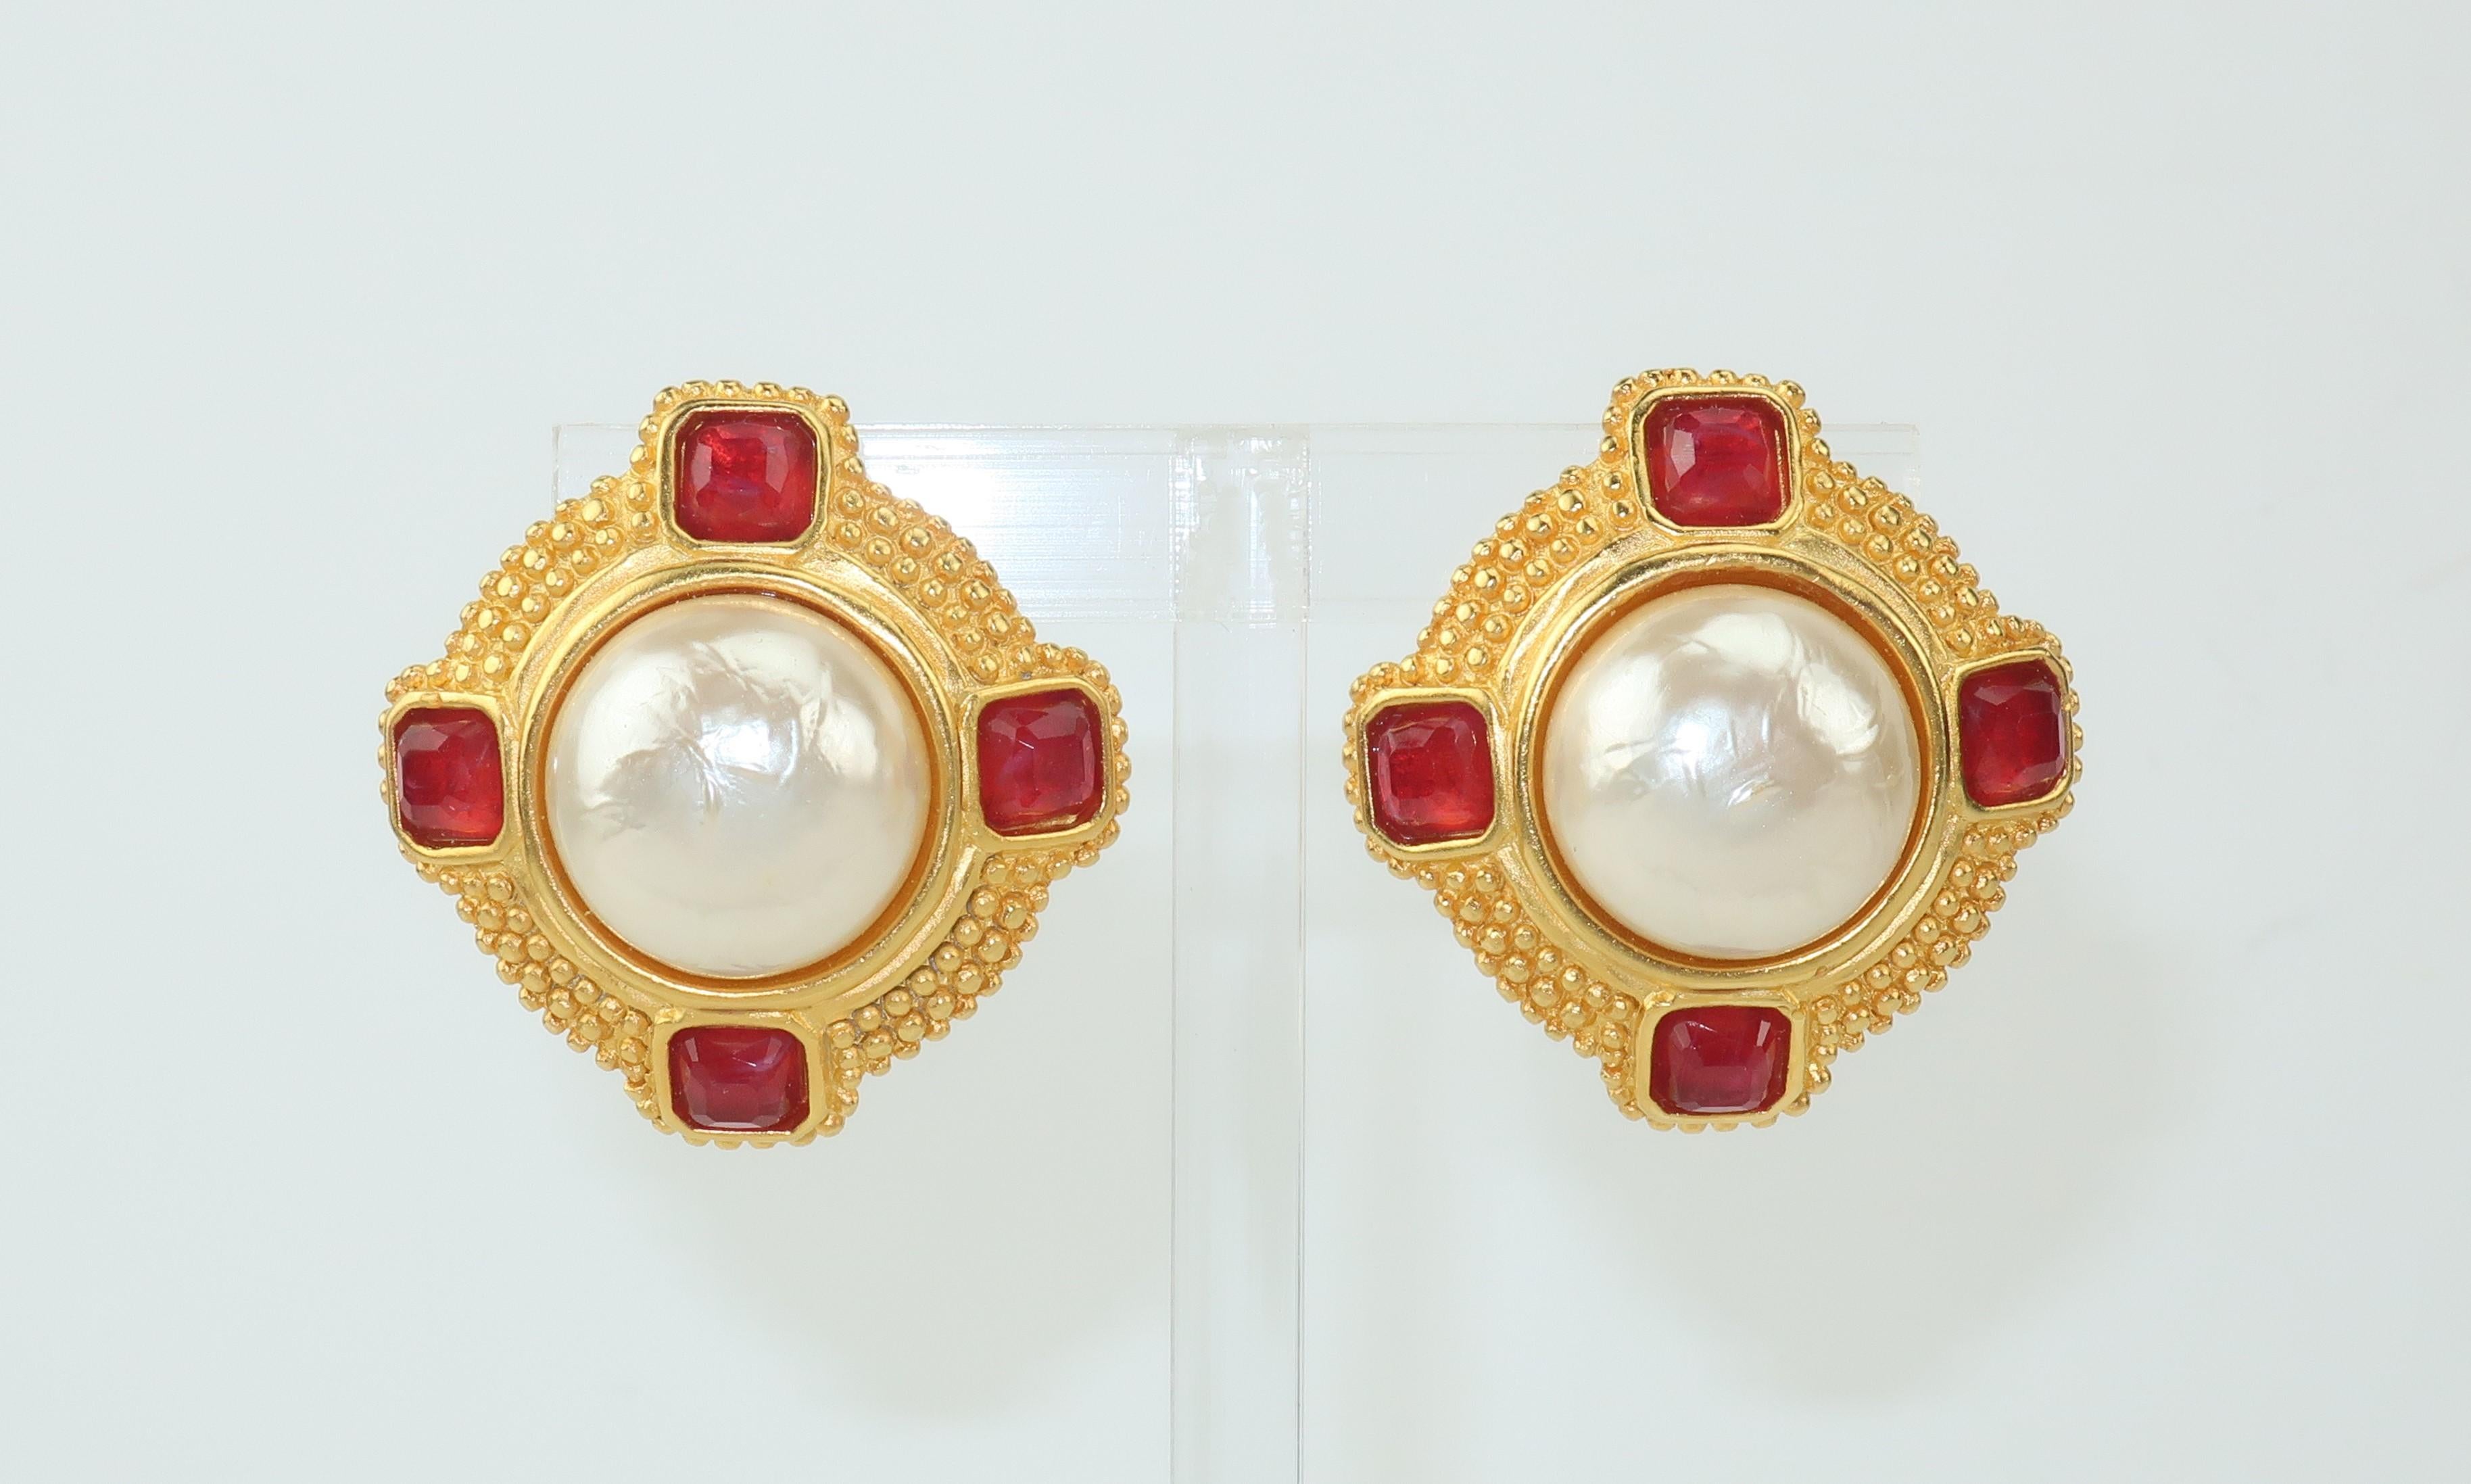 A chic pair of Karl Lagerfeld clip on earrings with faux mabe pearls accented by faceted amber color crystals set in a matte gold tone setting with a beaded design.  A classic design that will pair well with Lagerfeld or Chanel ensembles.  Signed